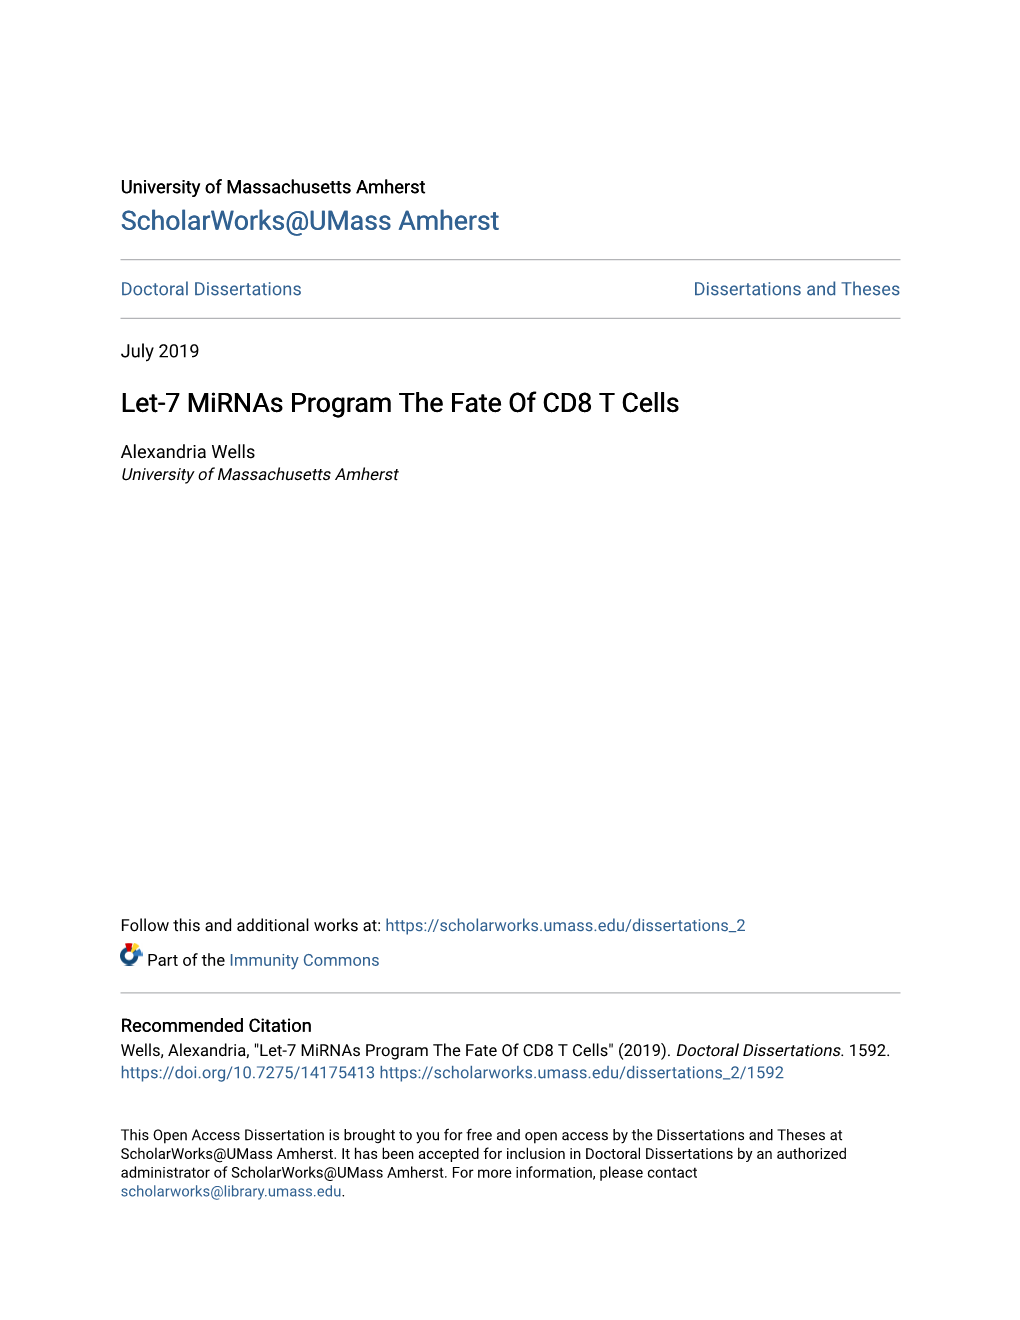 Let-7 Mirnas Program the Fate of CD8 T Cells